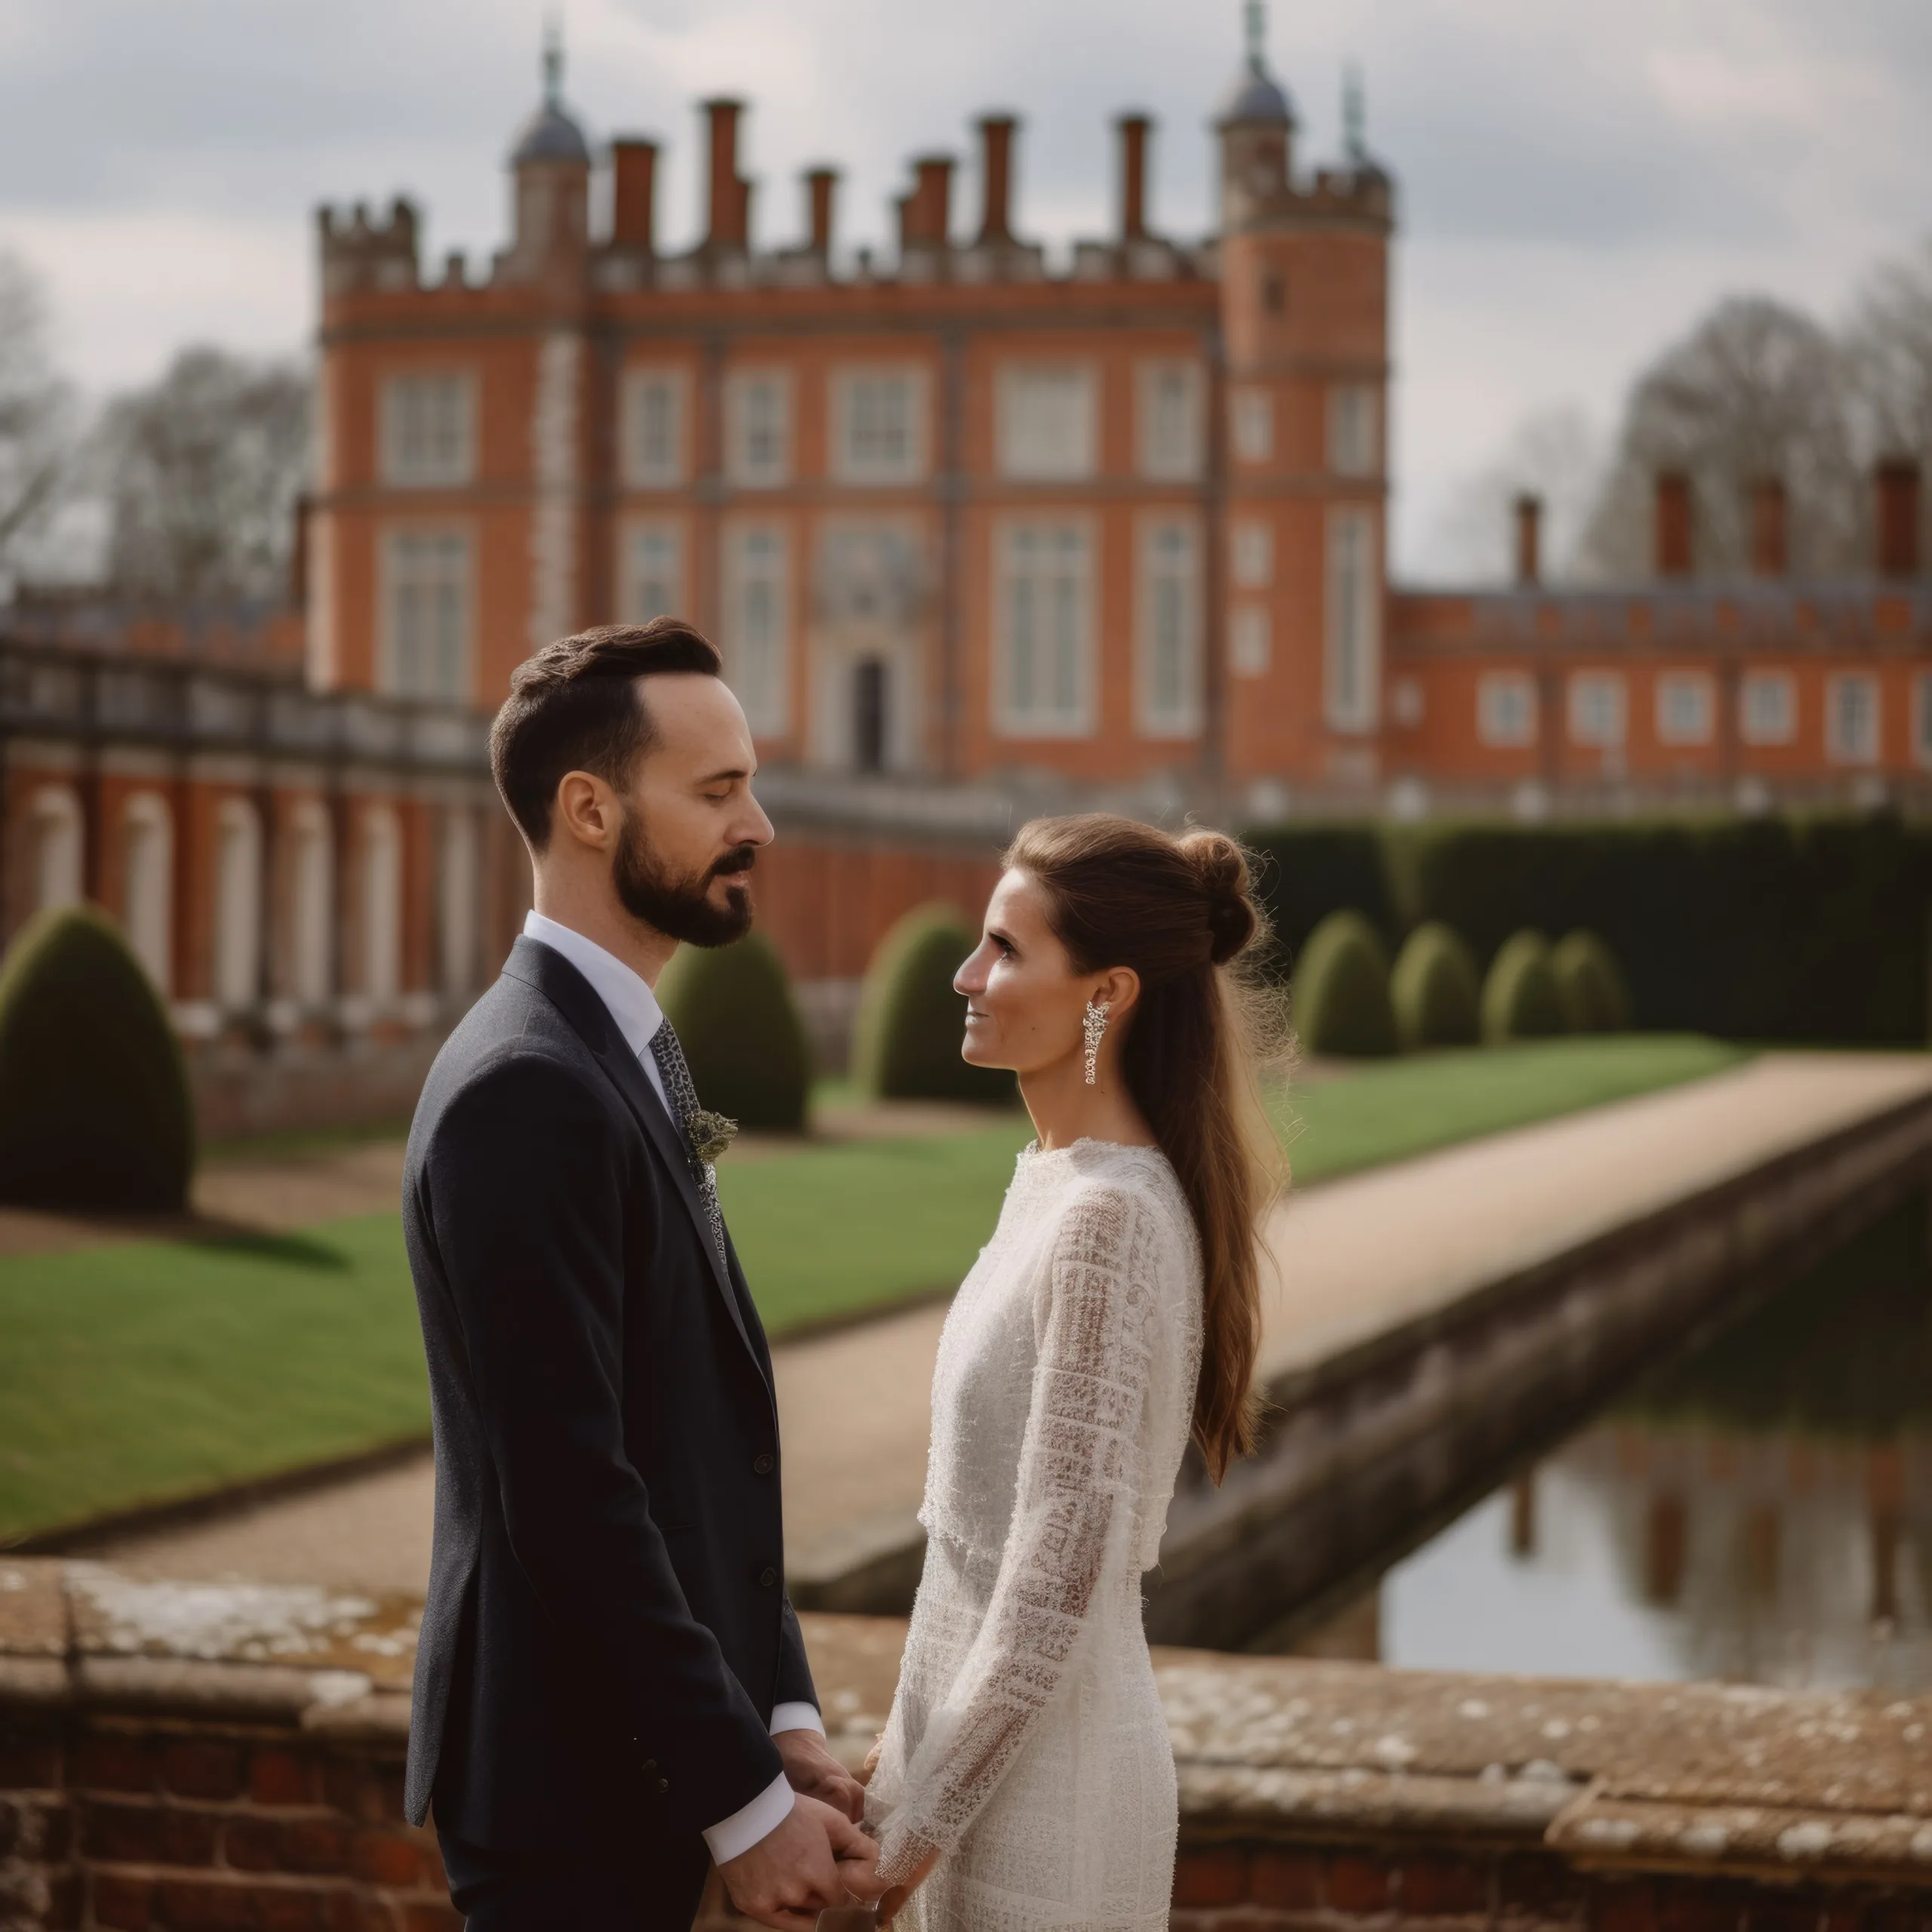 Wedding at Hampton Court Palace:a man and a woman standing in front of a building.